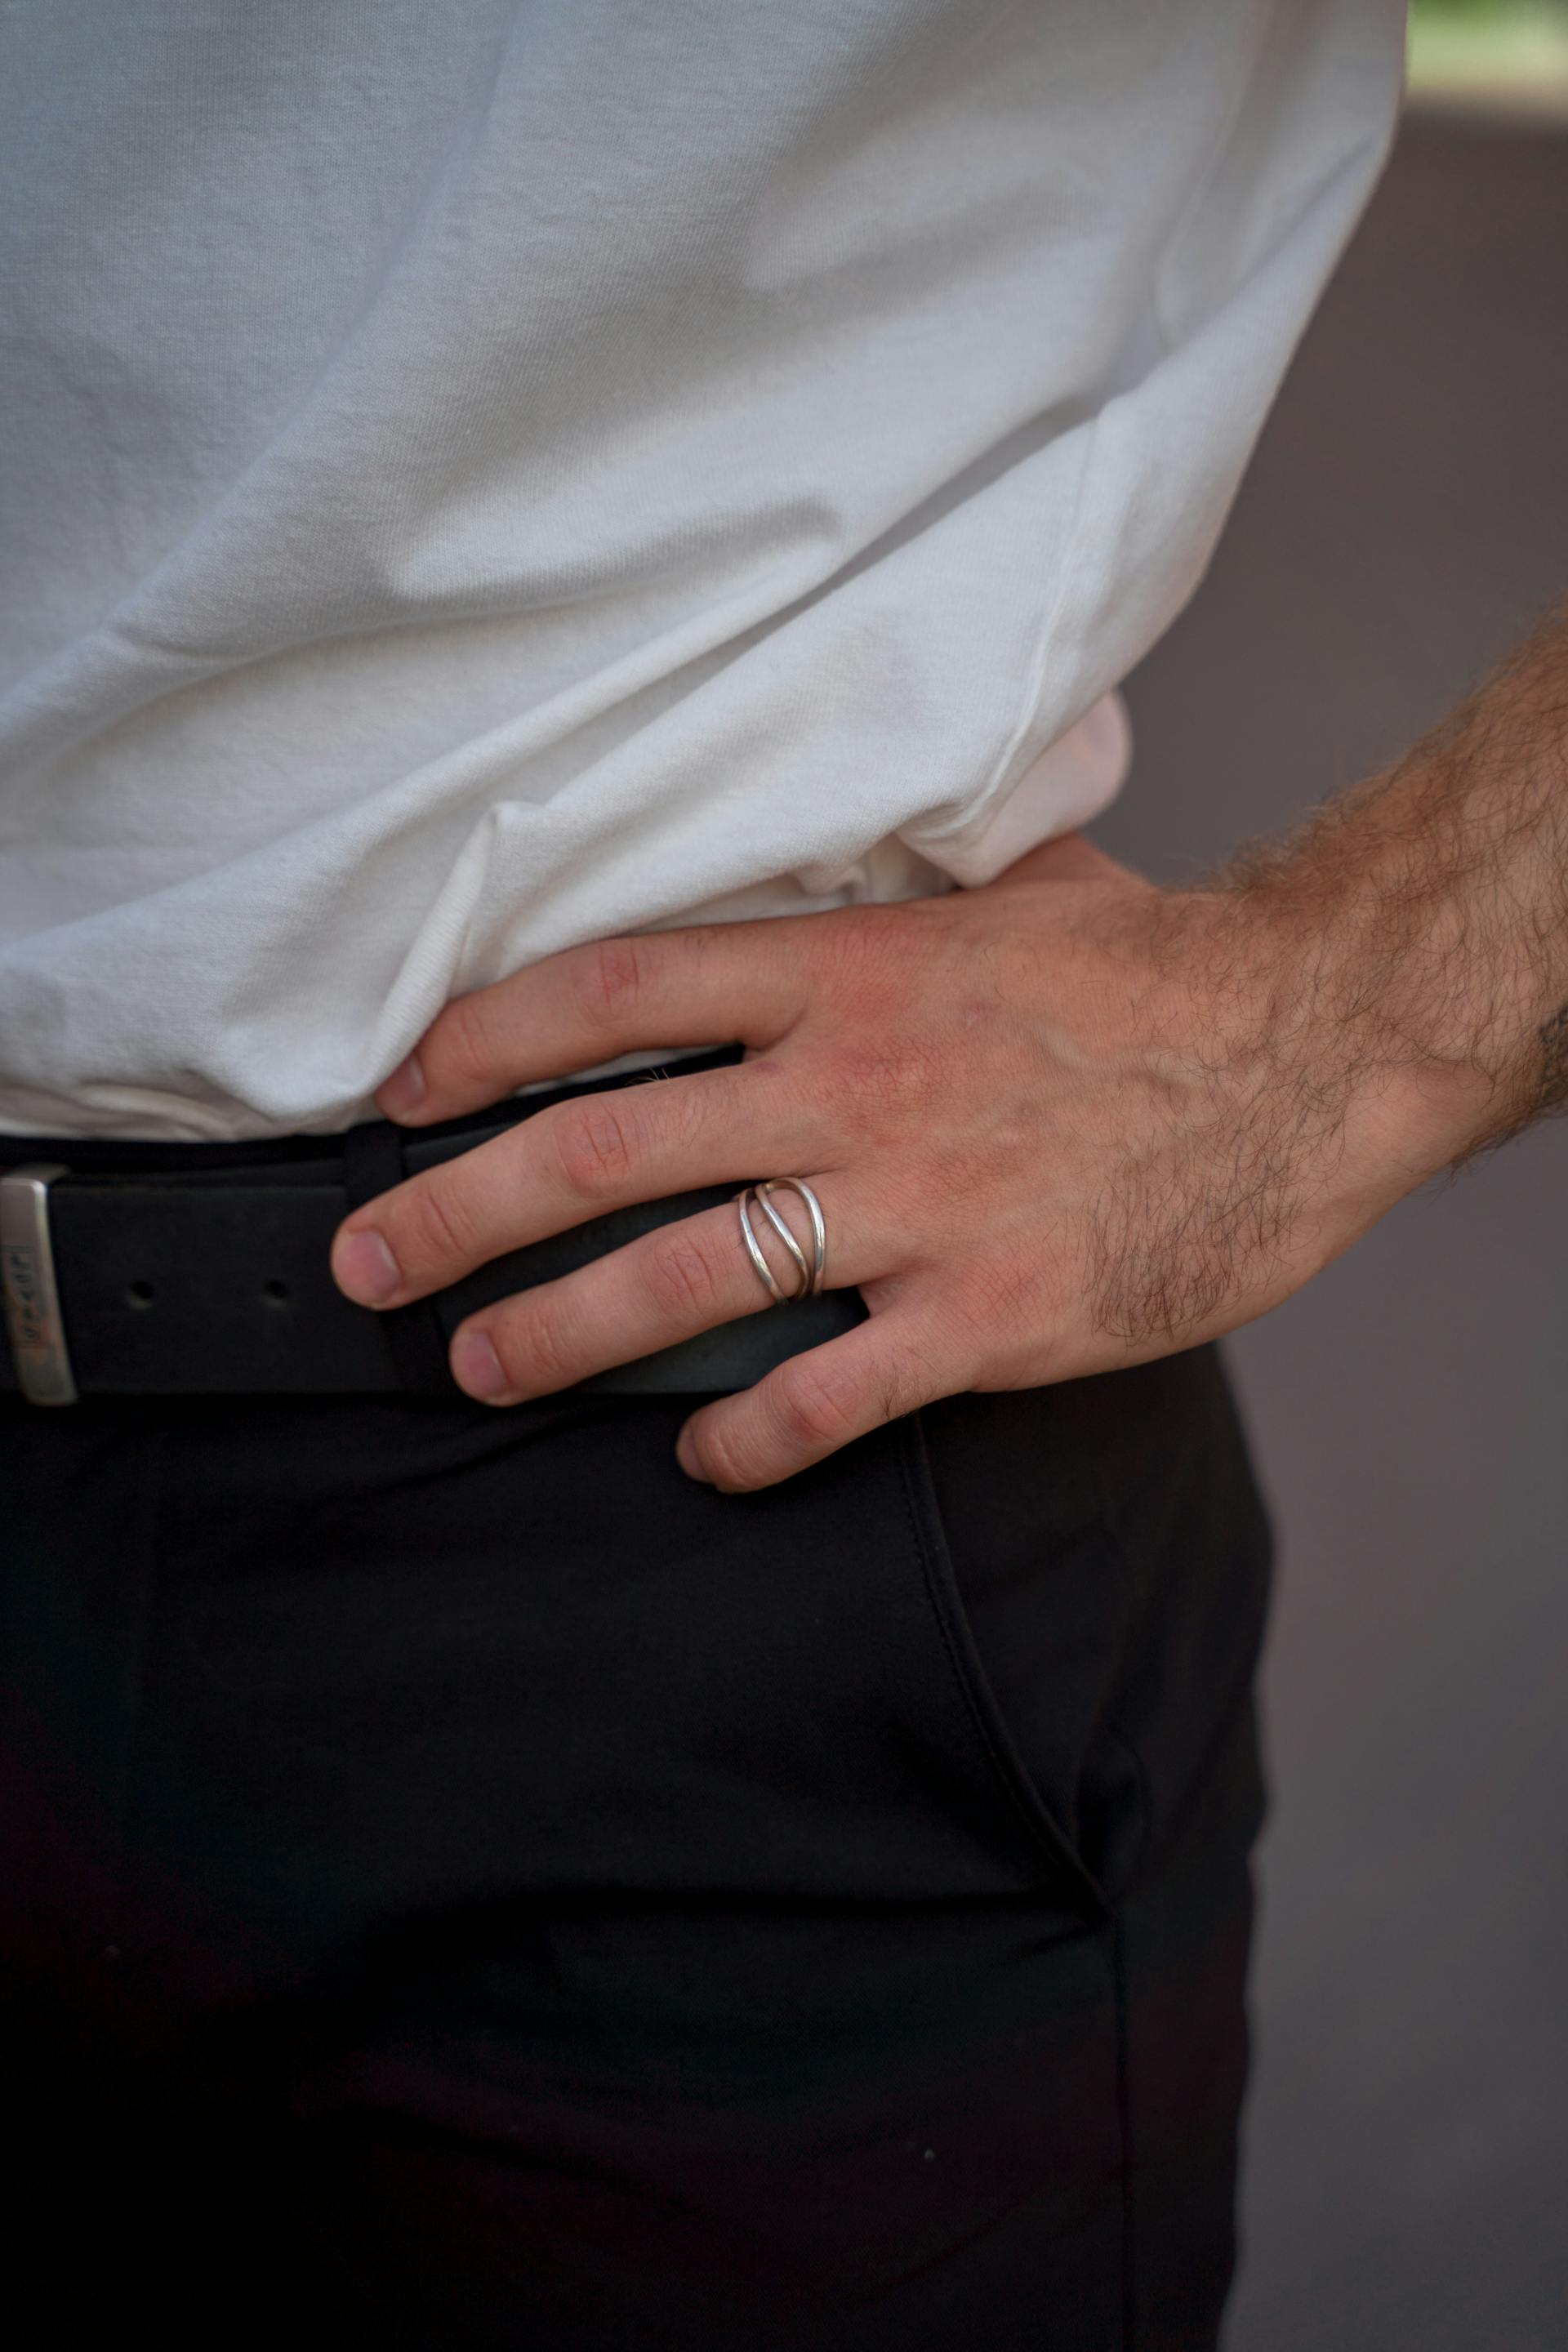 A man wearing a ring | Source: Pexels